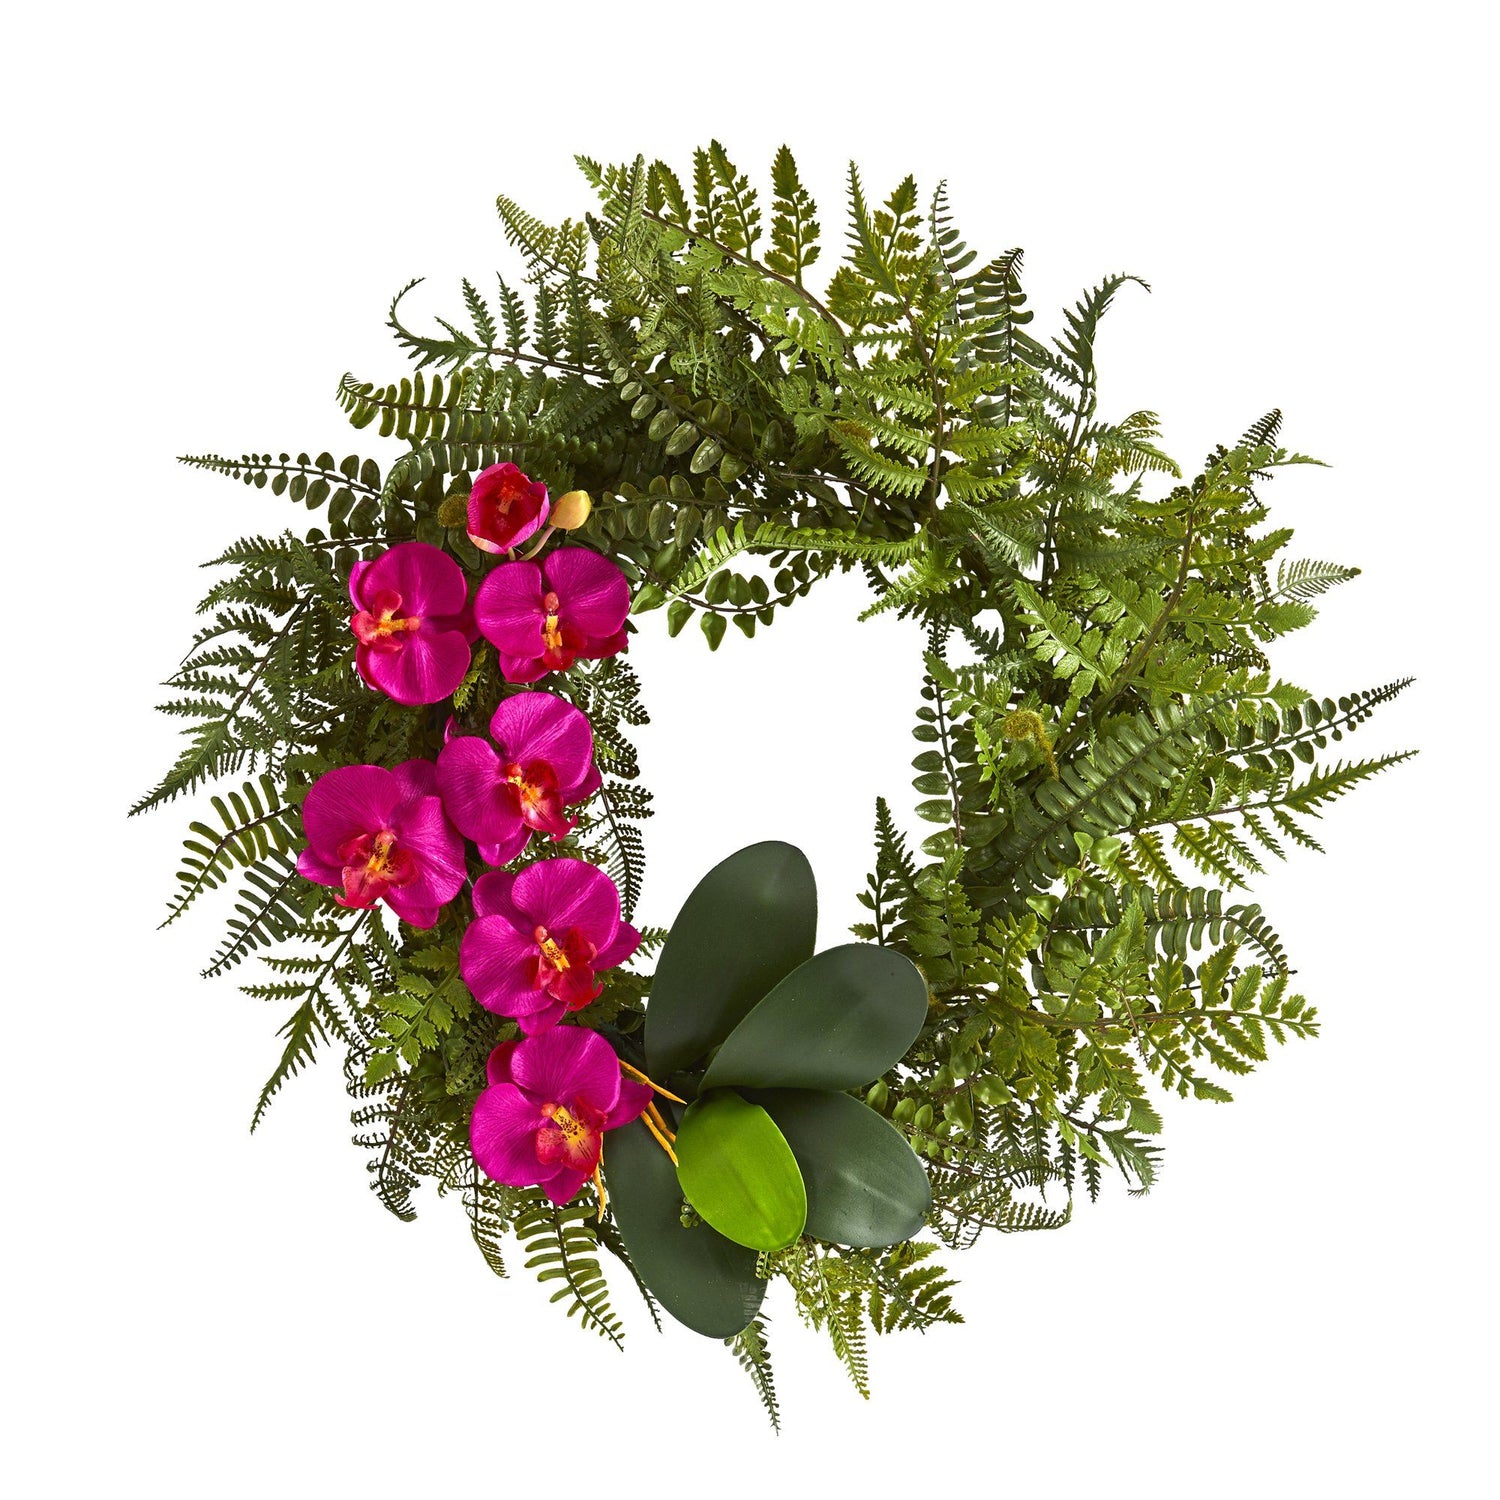 23” Mixed Greens and Phalaenopsis Orchid Artificial Wreath